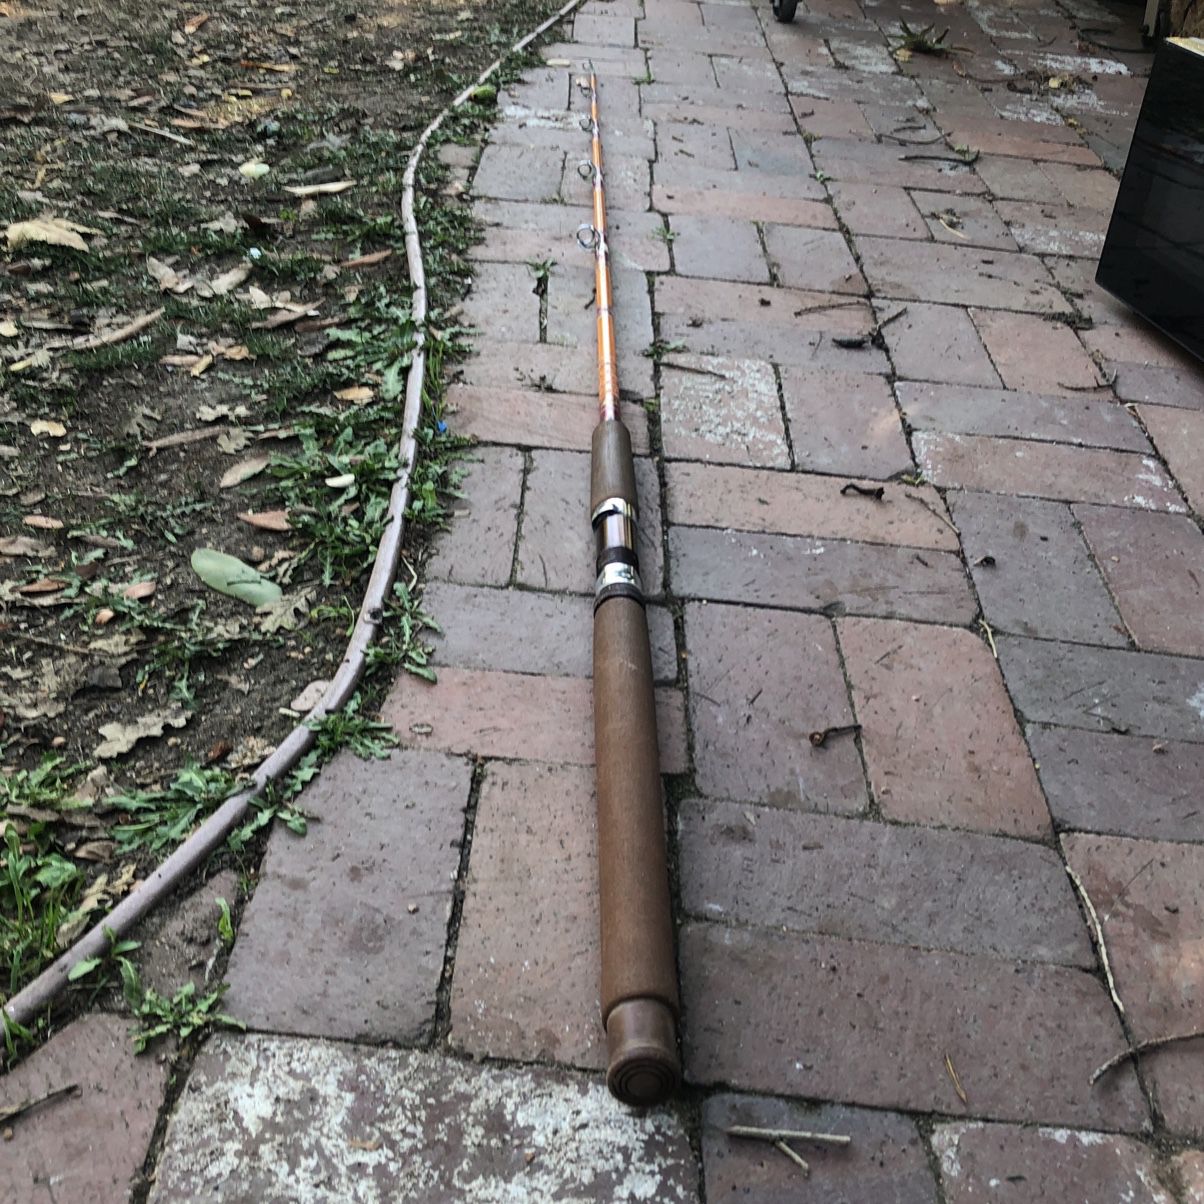 Fishing Fly Fishing Pole 6 Ft Good Condition No Reel